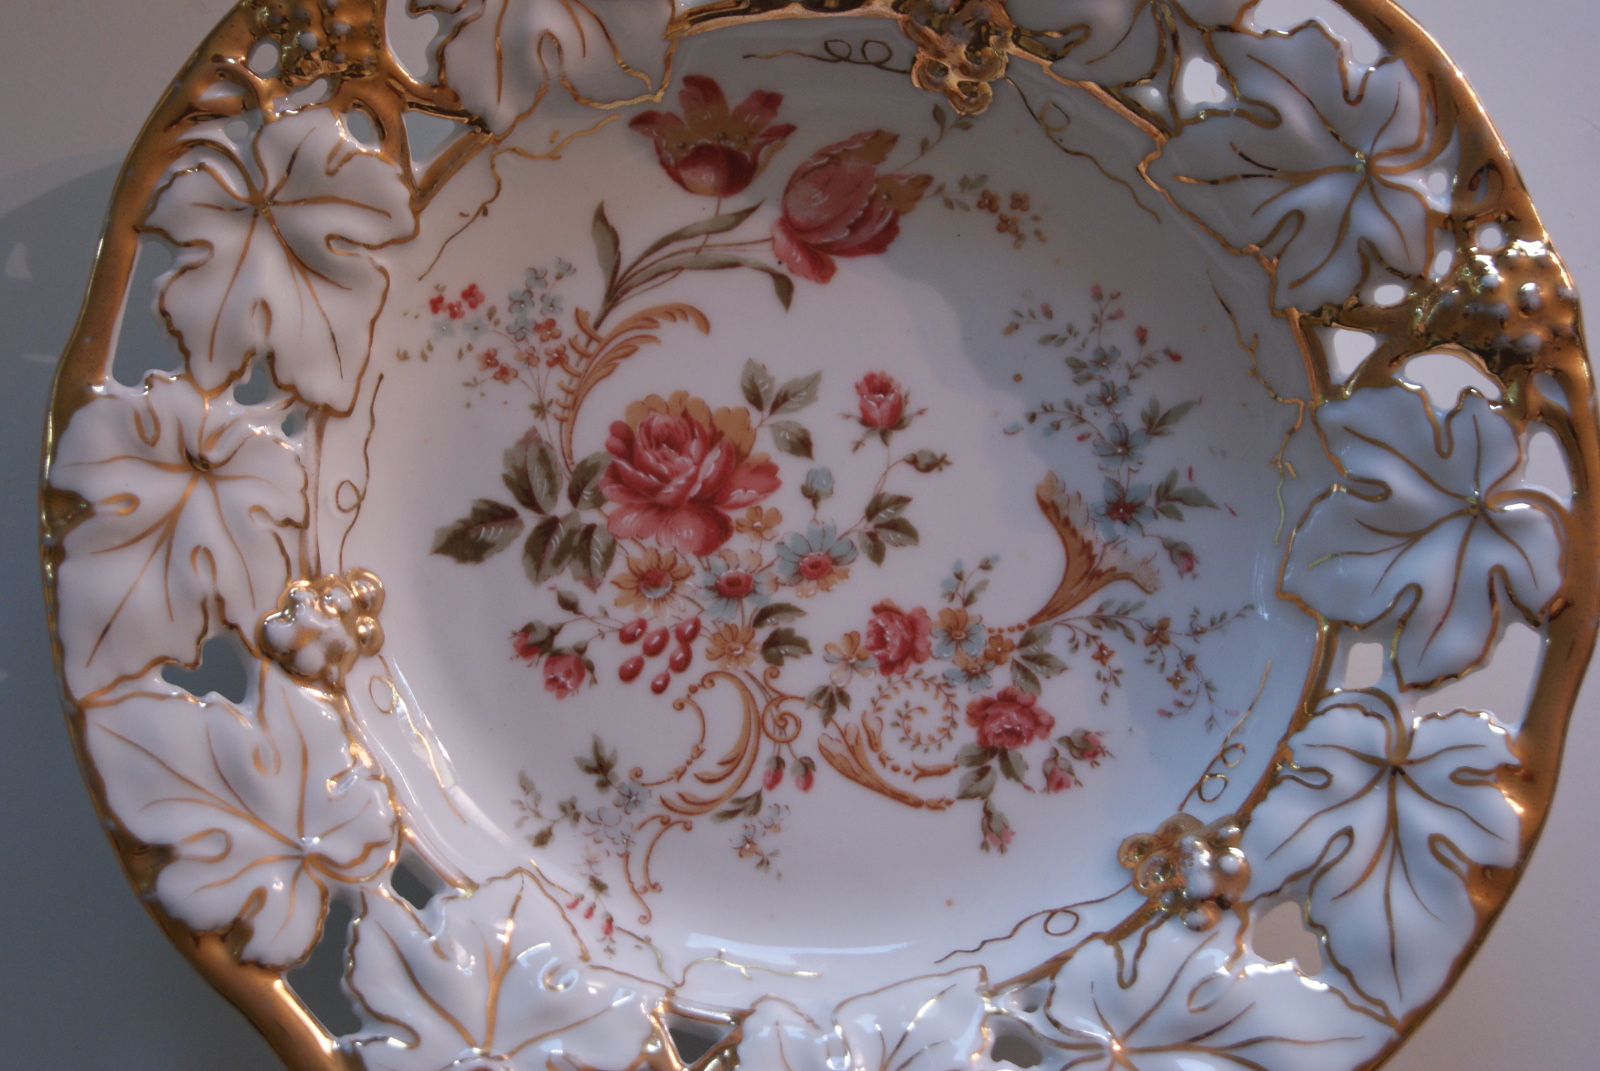 Waldenburg - Altwasser dish with flowers leaf and grapes relief and golden decor